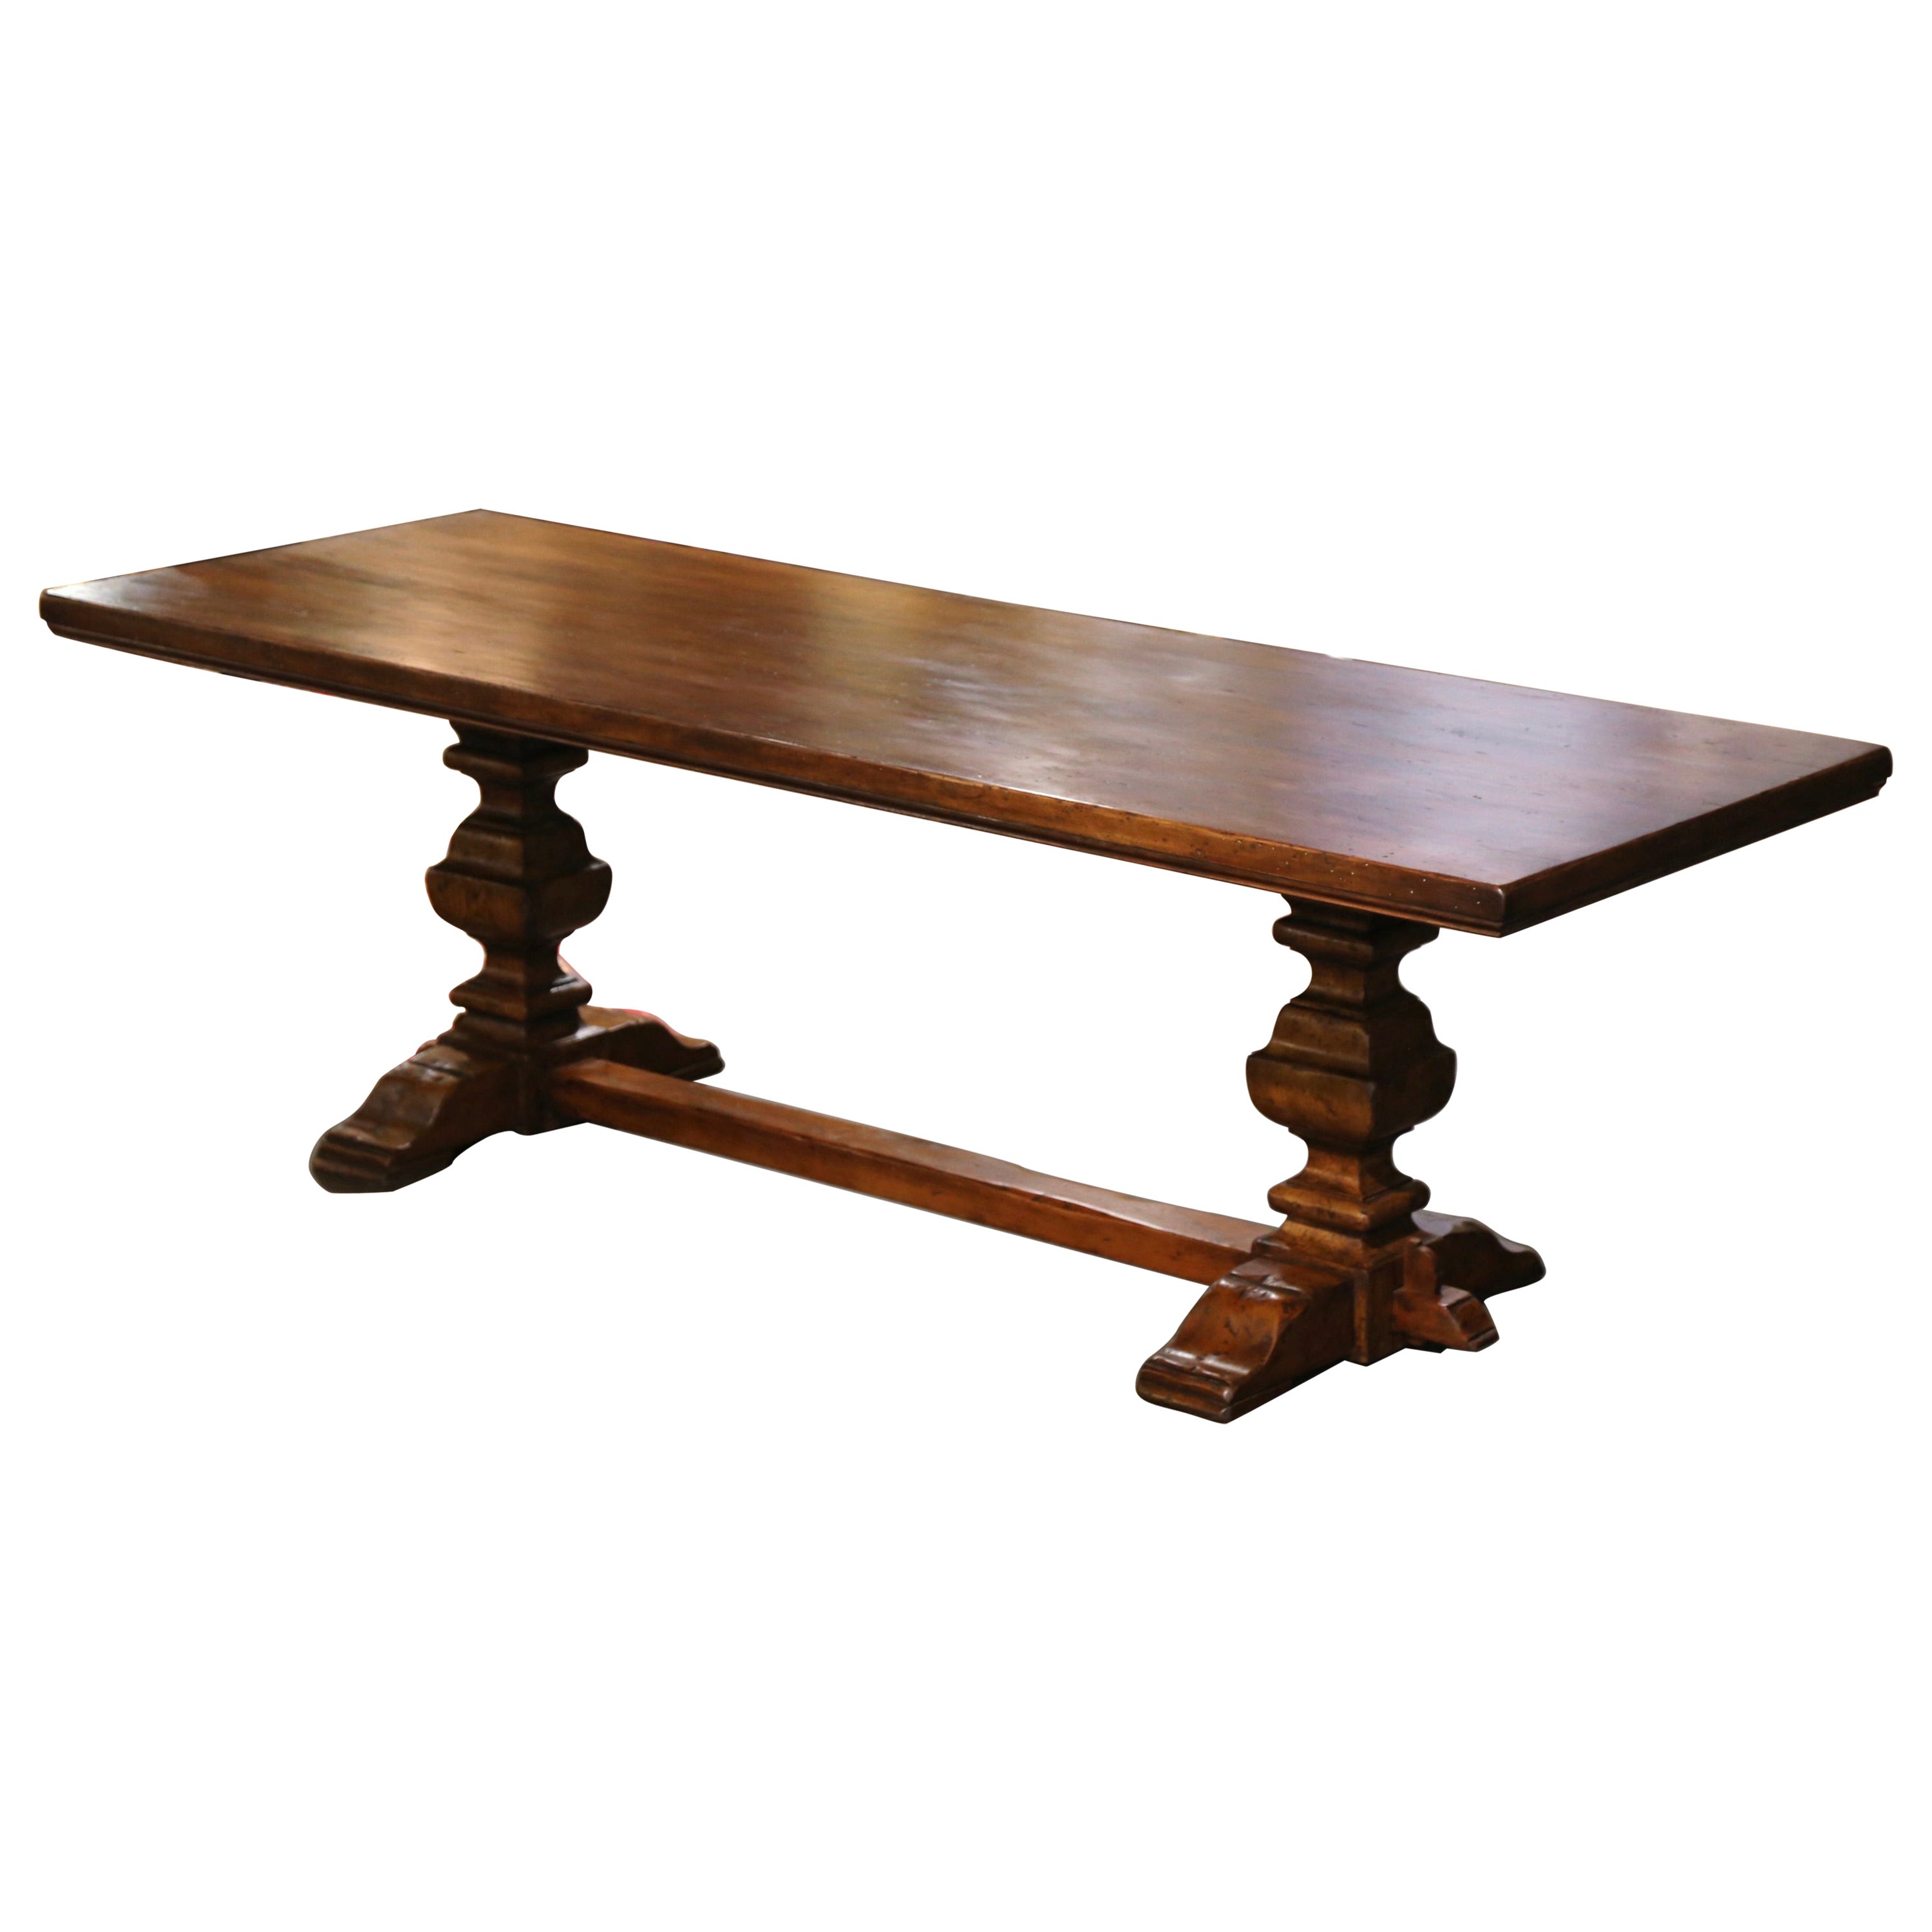 Early 20th Century French Baroque Carved Walnut Monastery Trestle Table